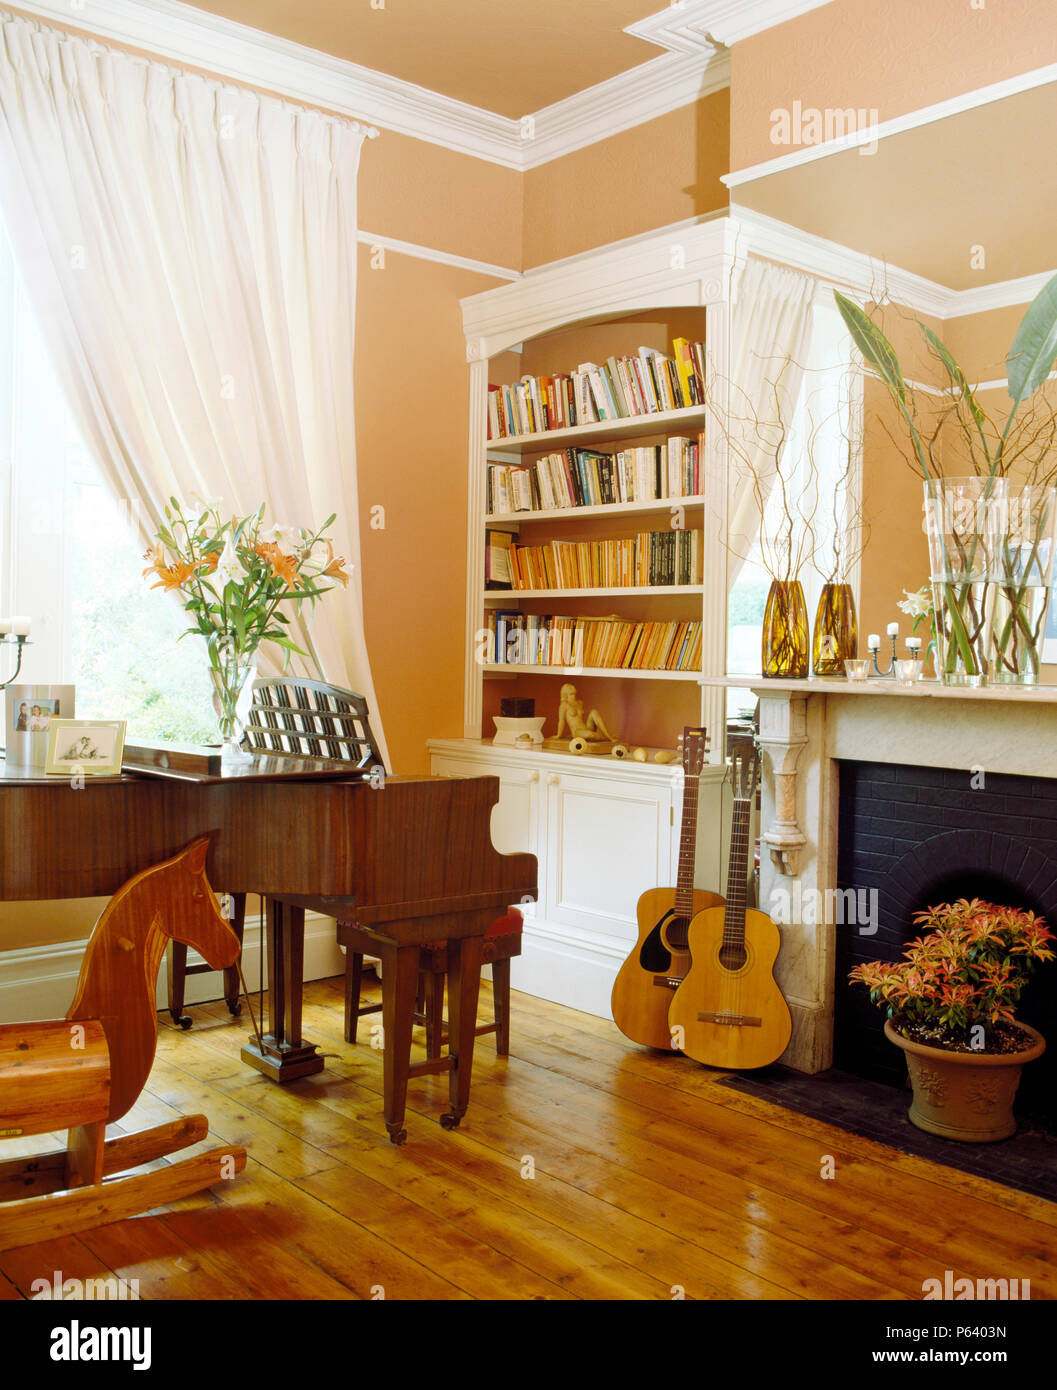 Grand Piano And Guitars In Living Room With Highly Polished Wooden